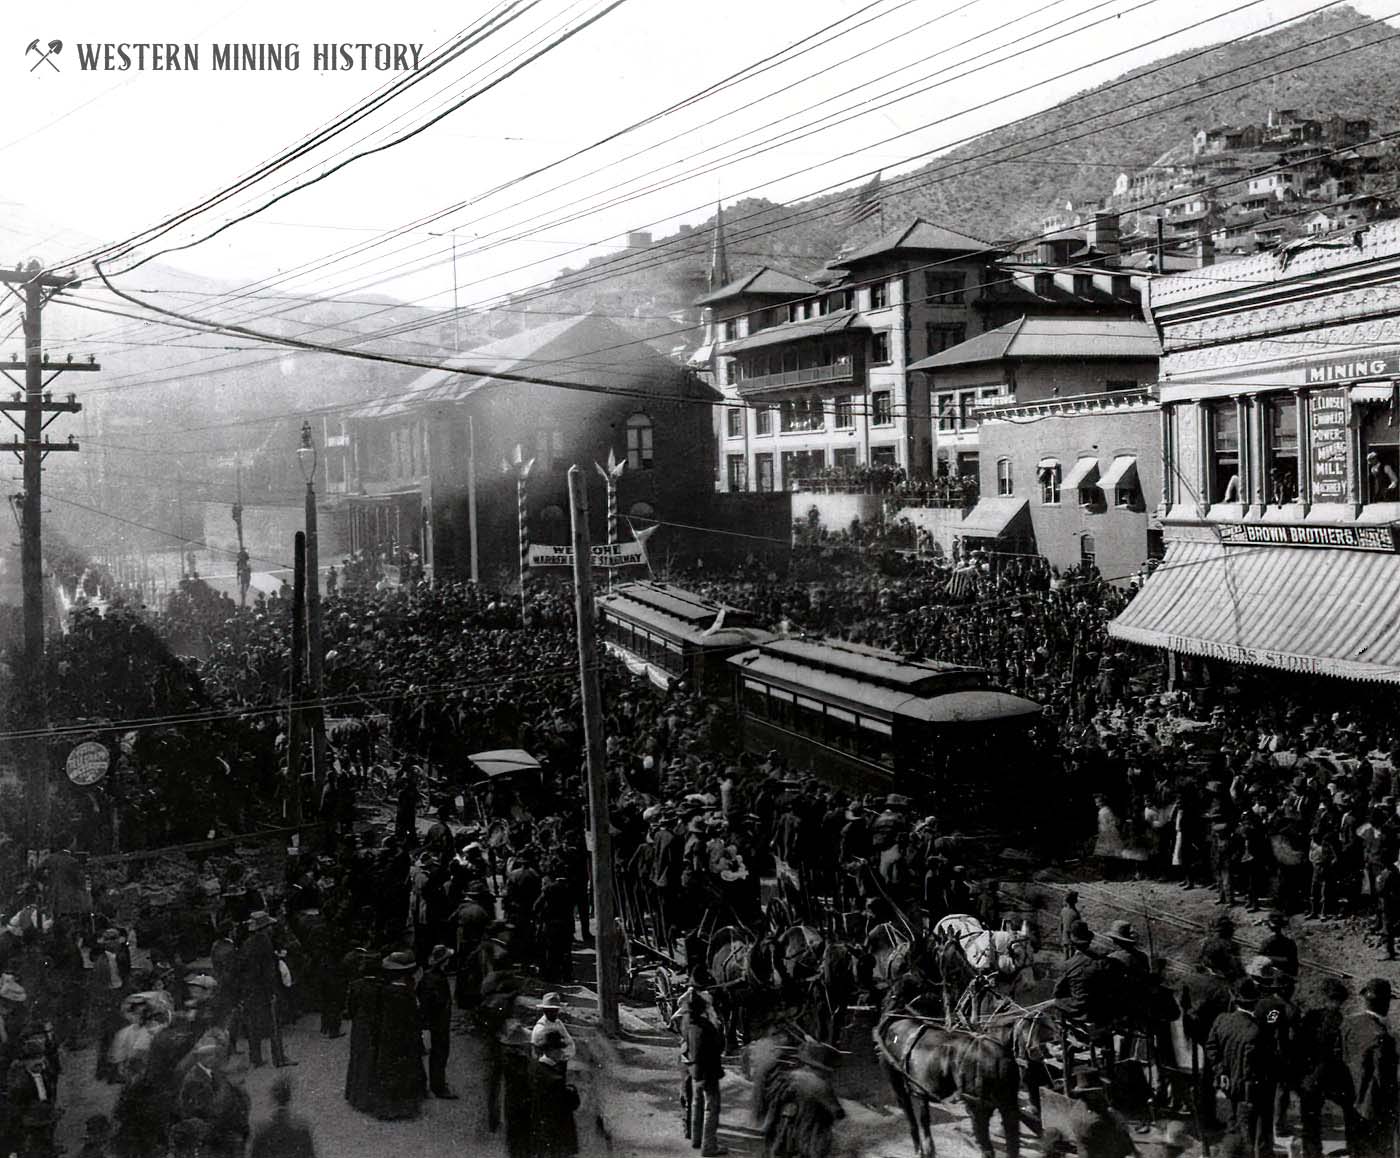 Bisbee citizens celebrate the completion of the streetcar line in 1908